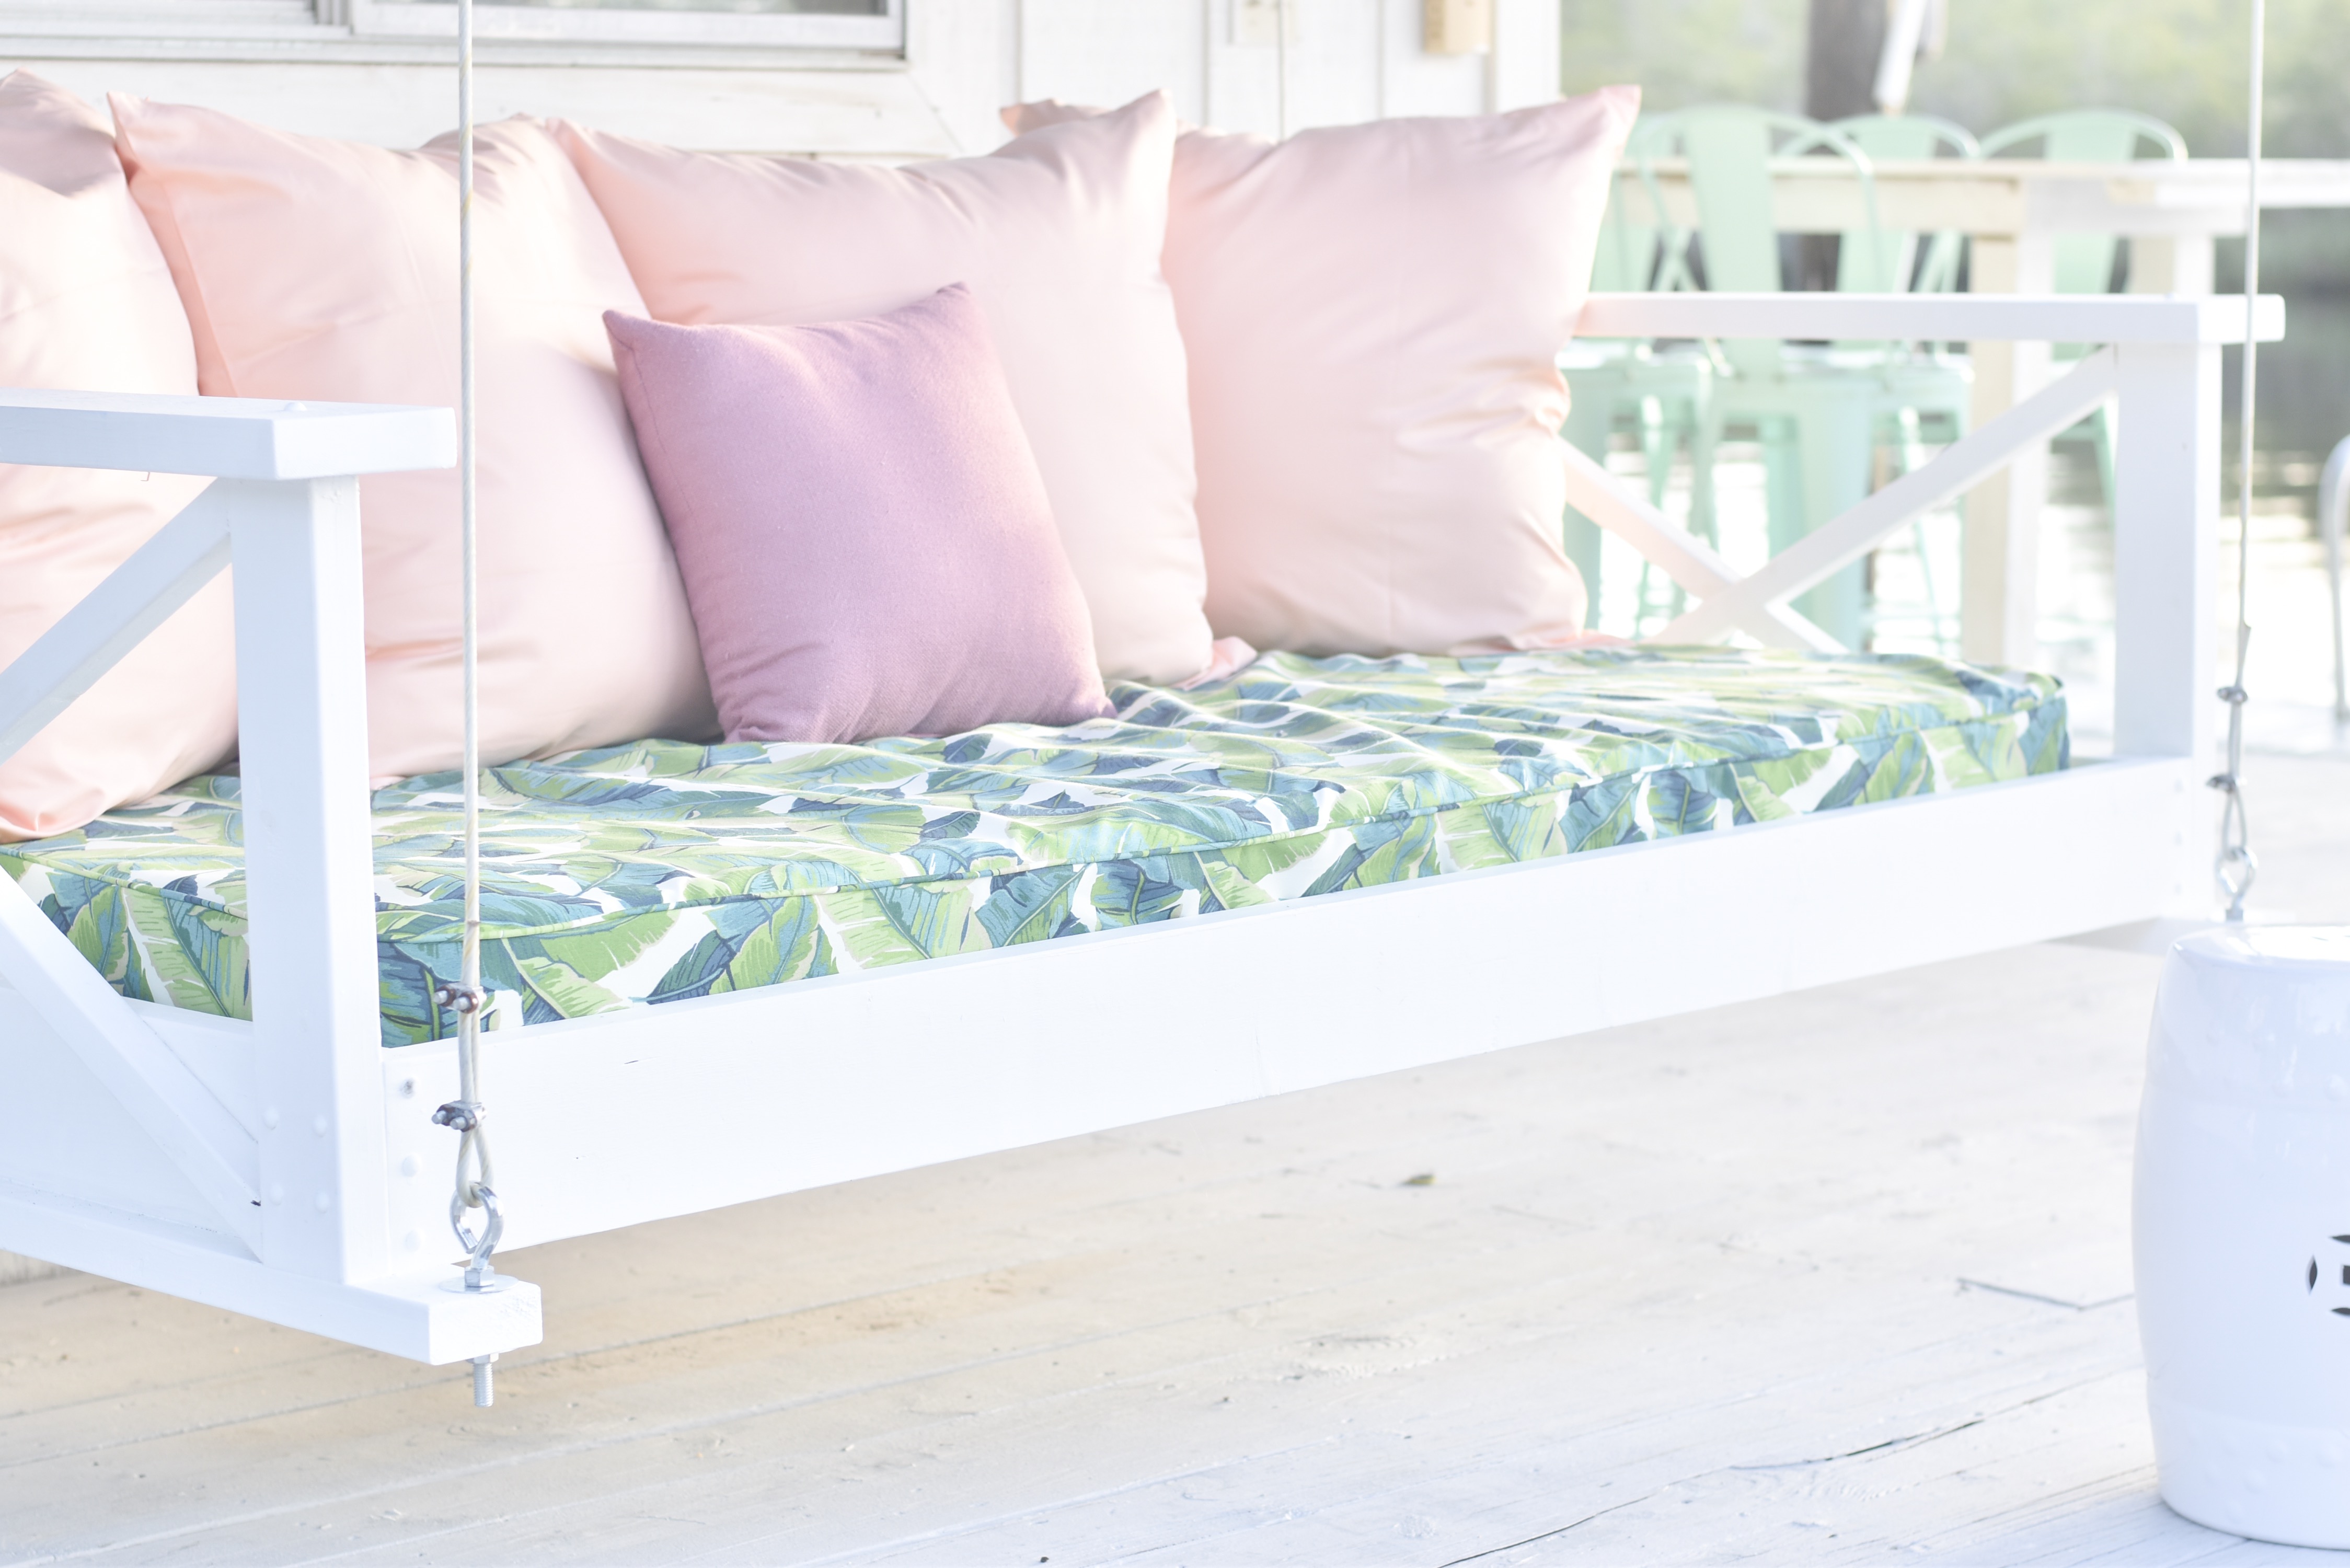 Jami Ray's chic swing bed on the dock by Nate and Lane